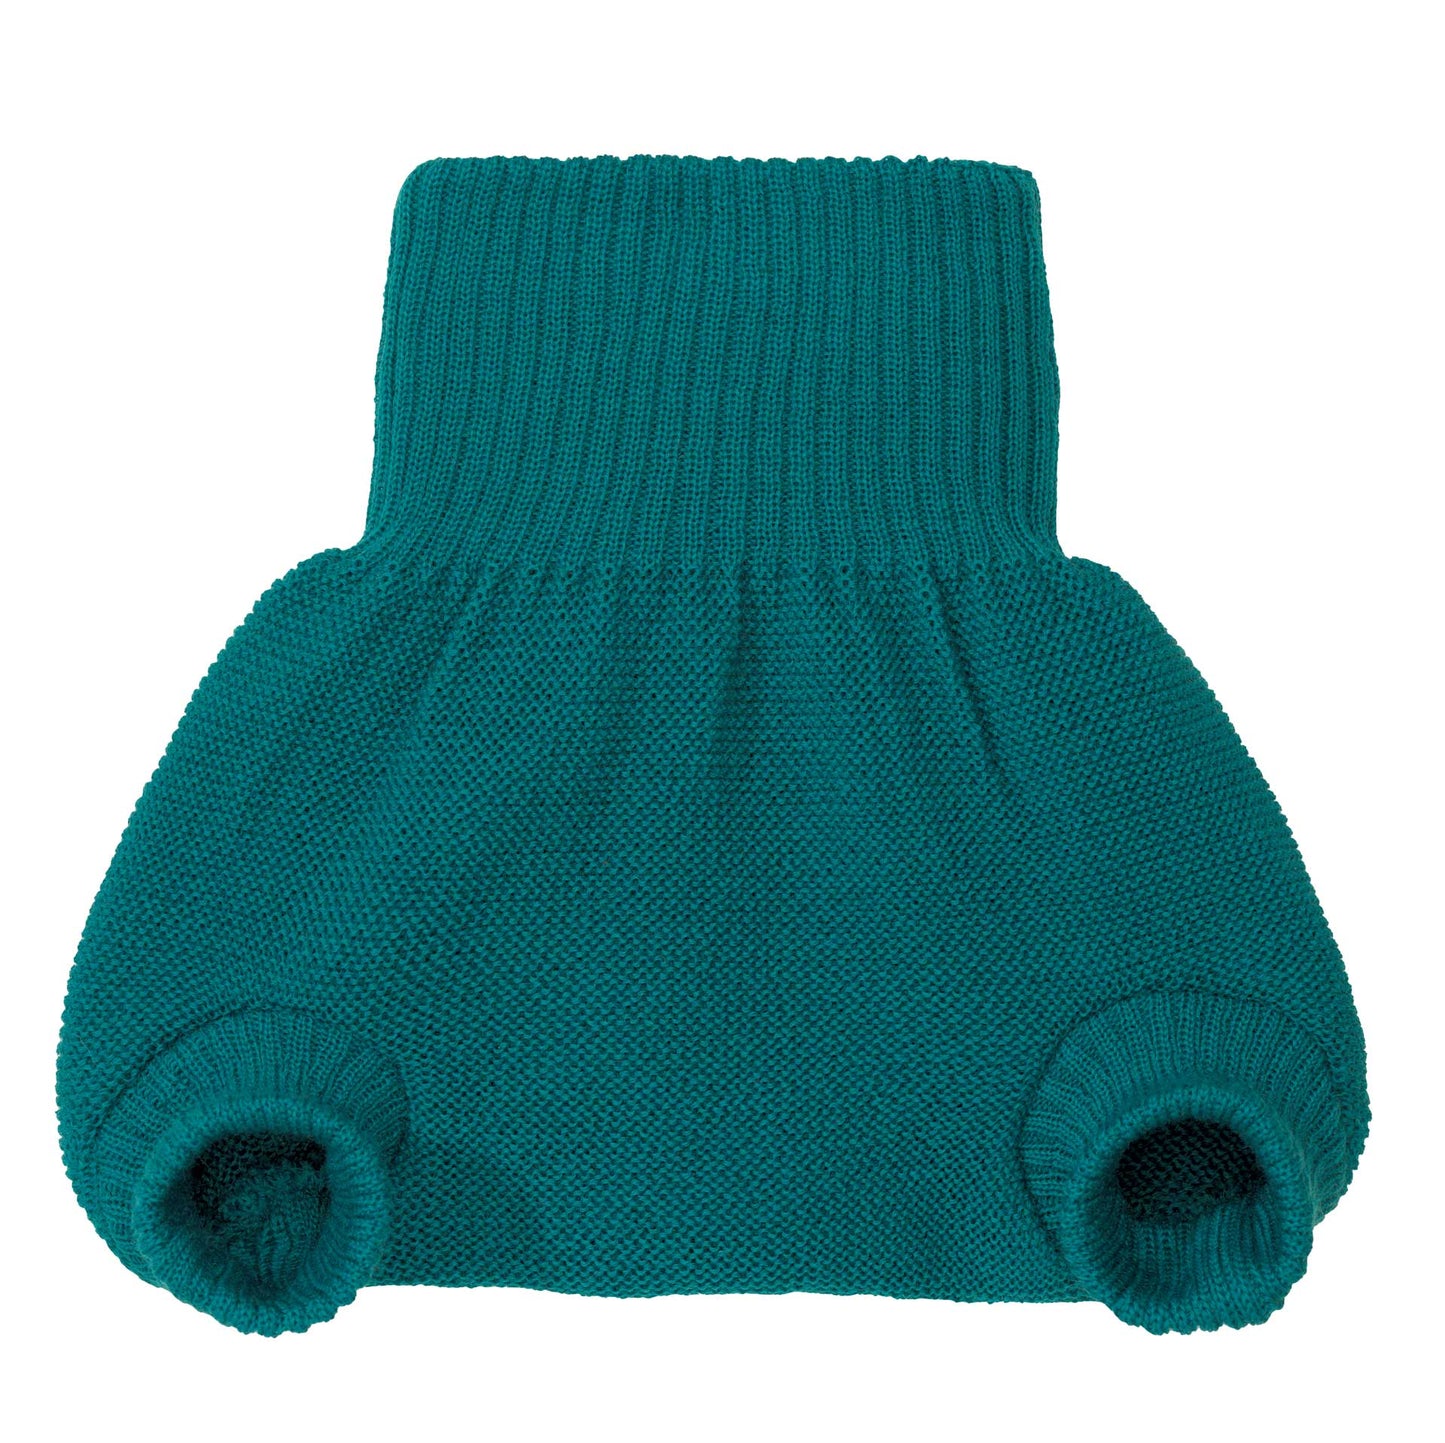 Wool Nappy Cover | 12-24 months (86/92)